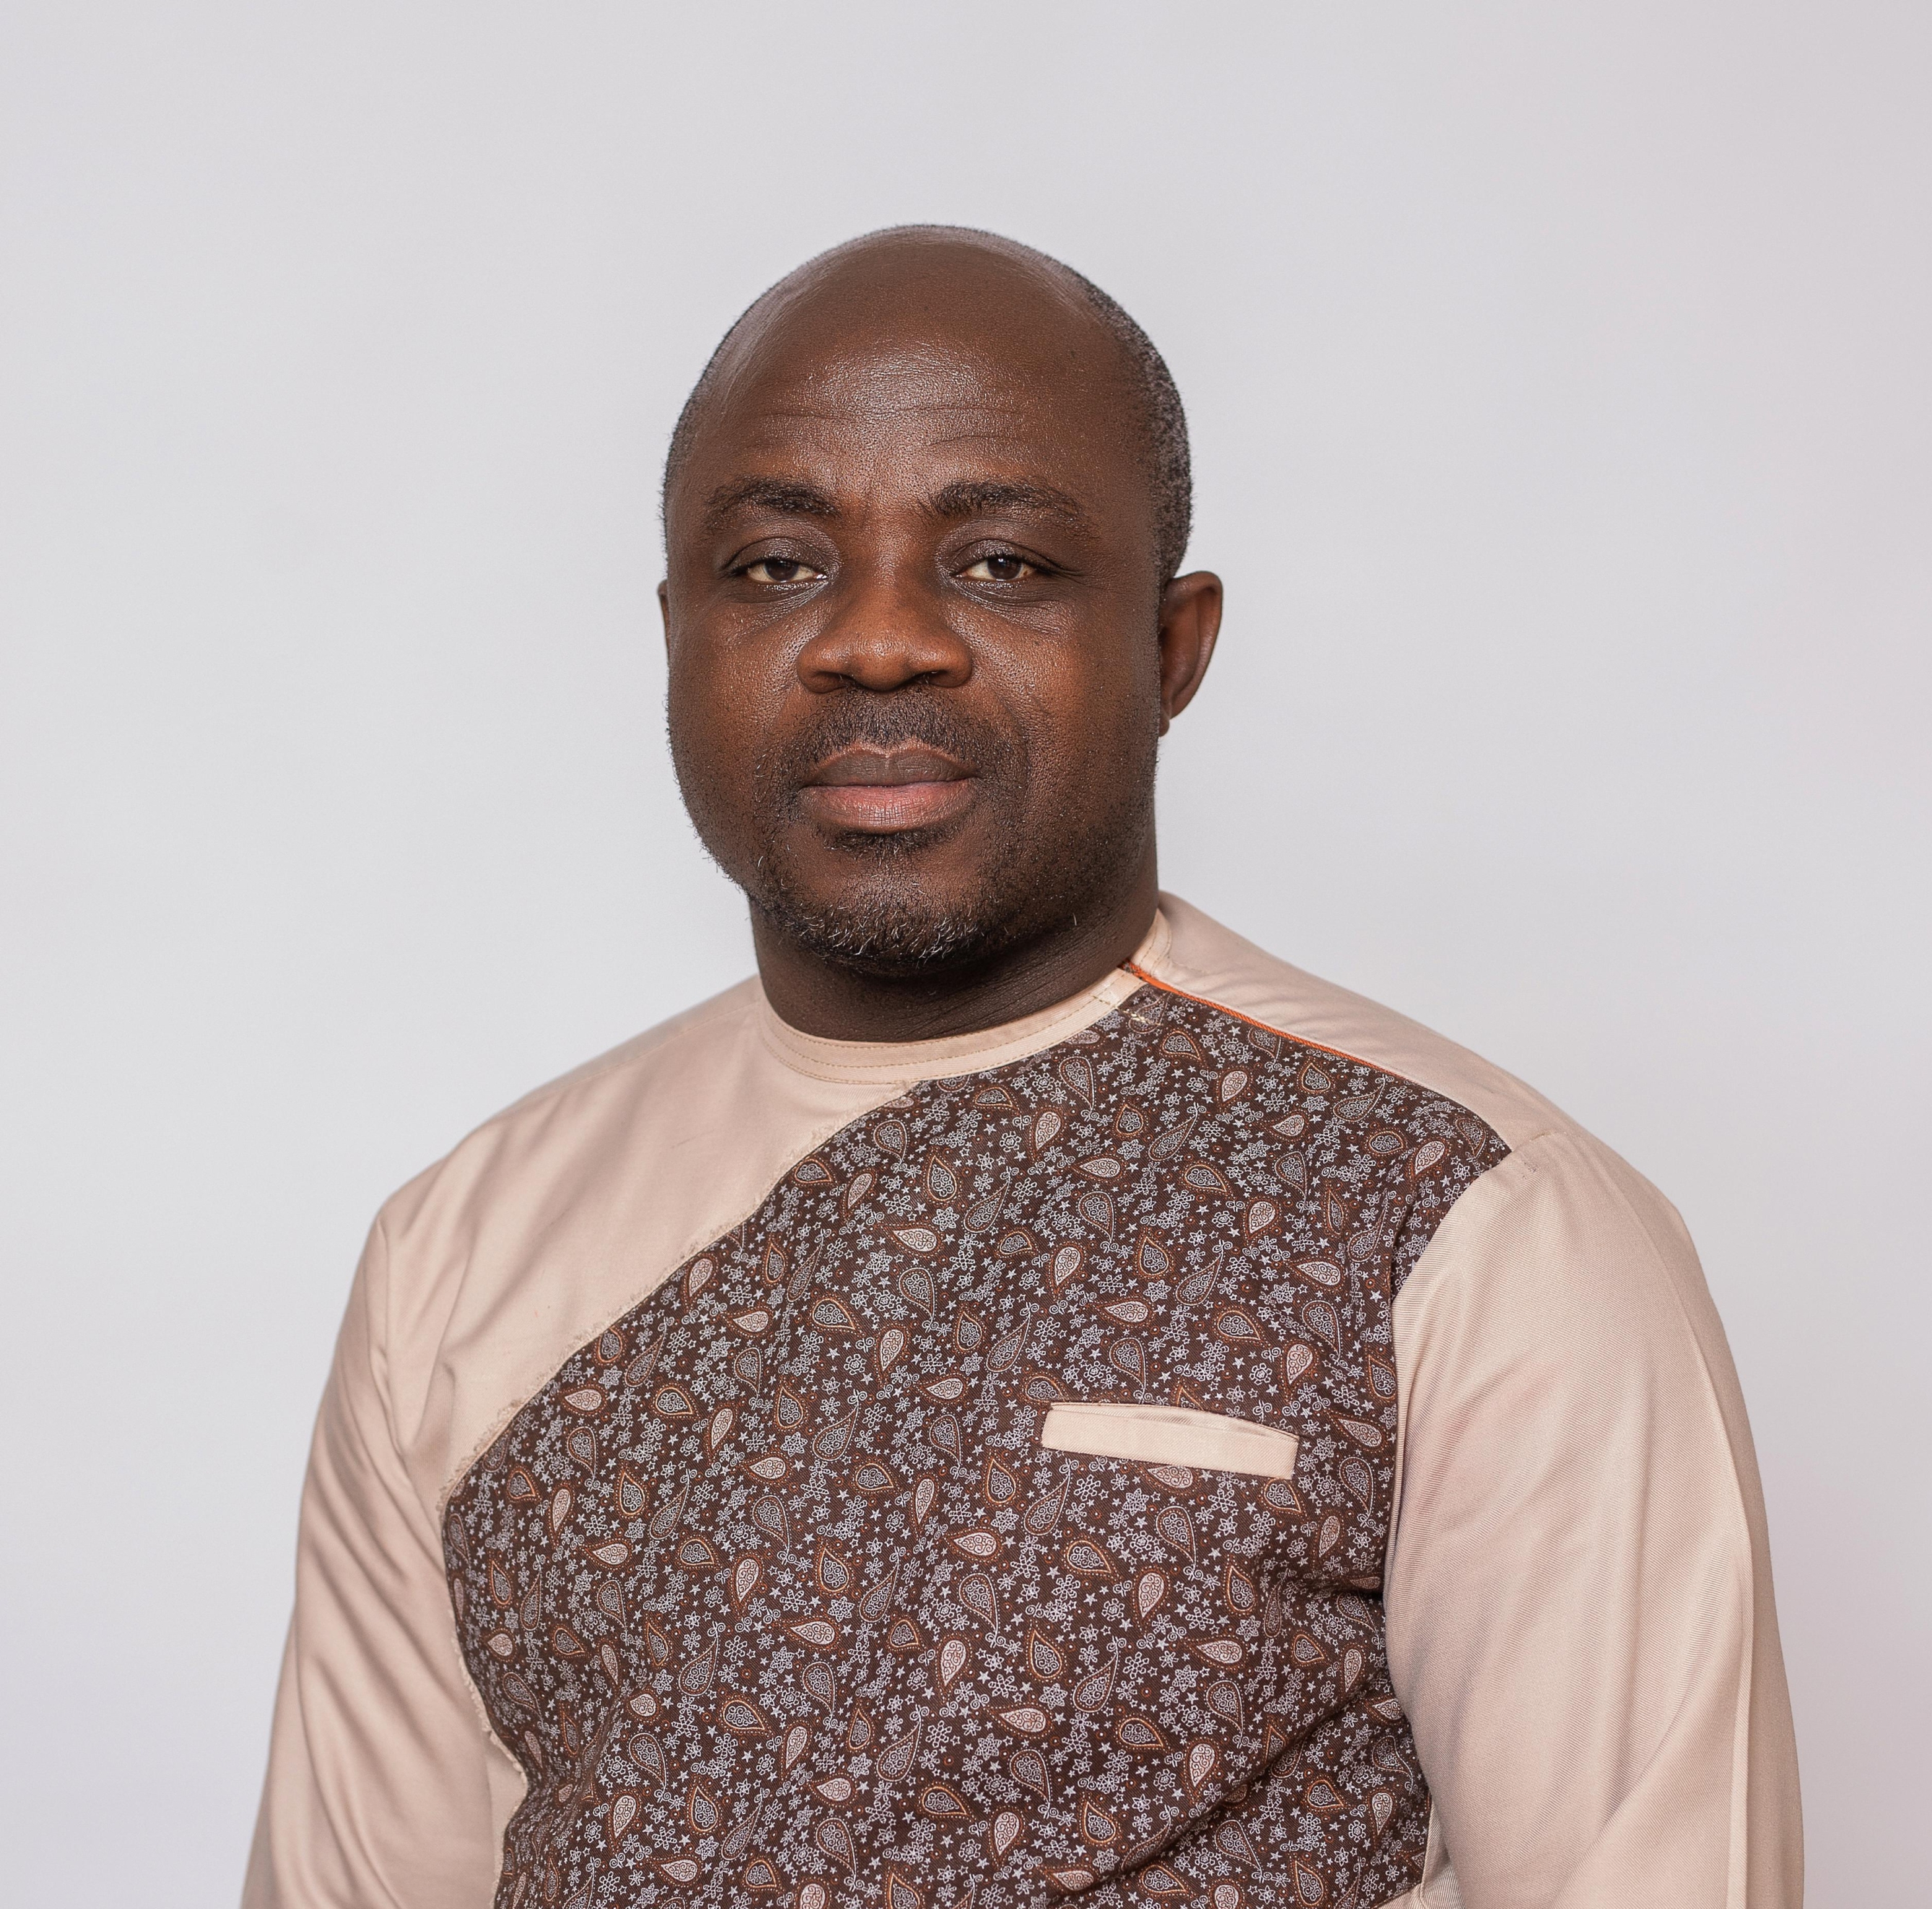 Dr. Clement Oppong